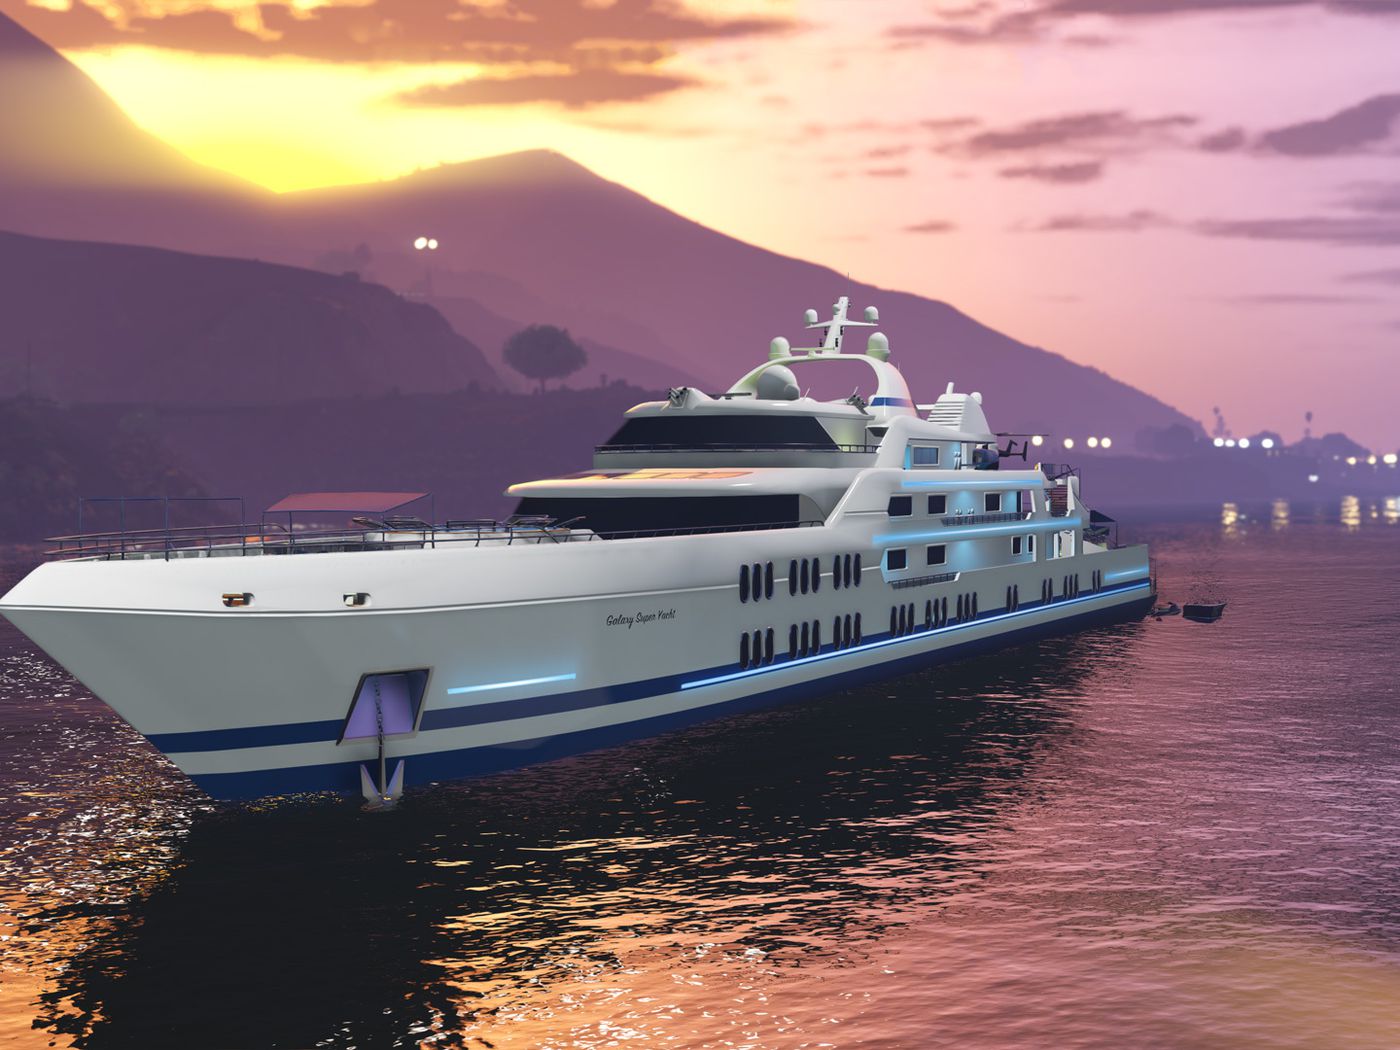 Expensive and Useless Micro-transactions - Yacht & Lazer Jet, $100 (Grand Theft Auto V)